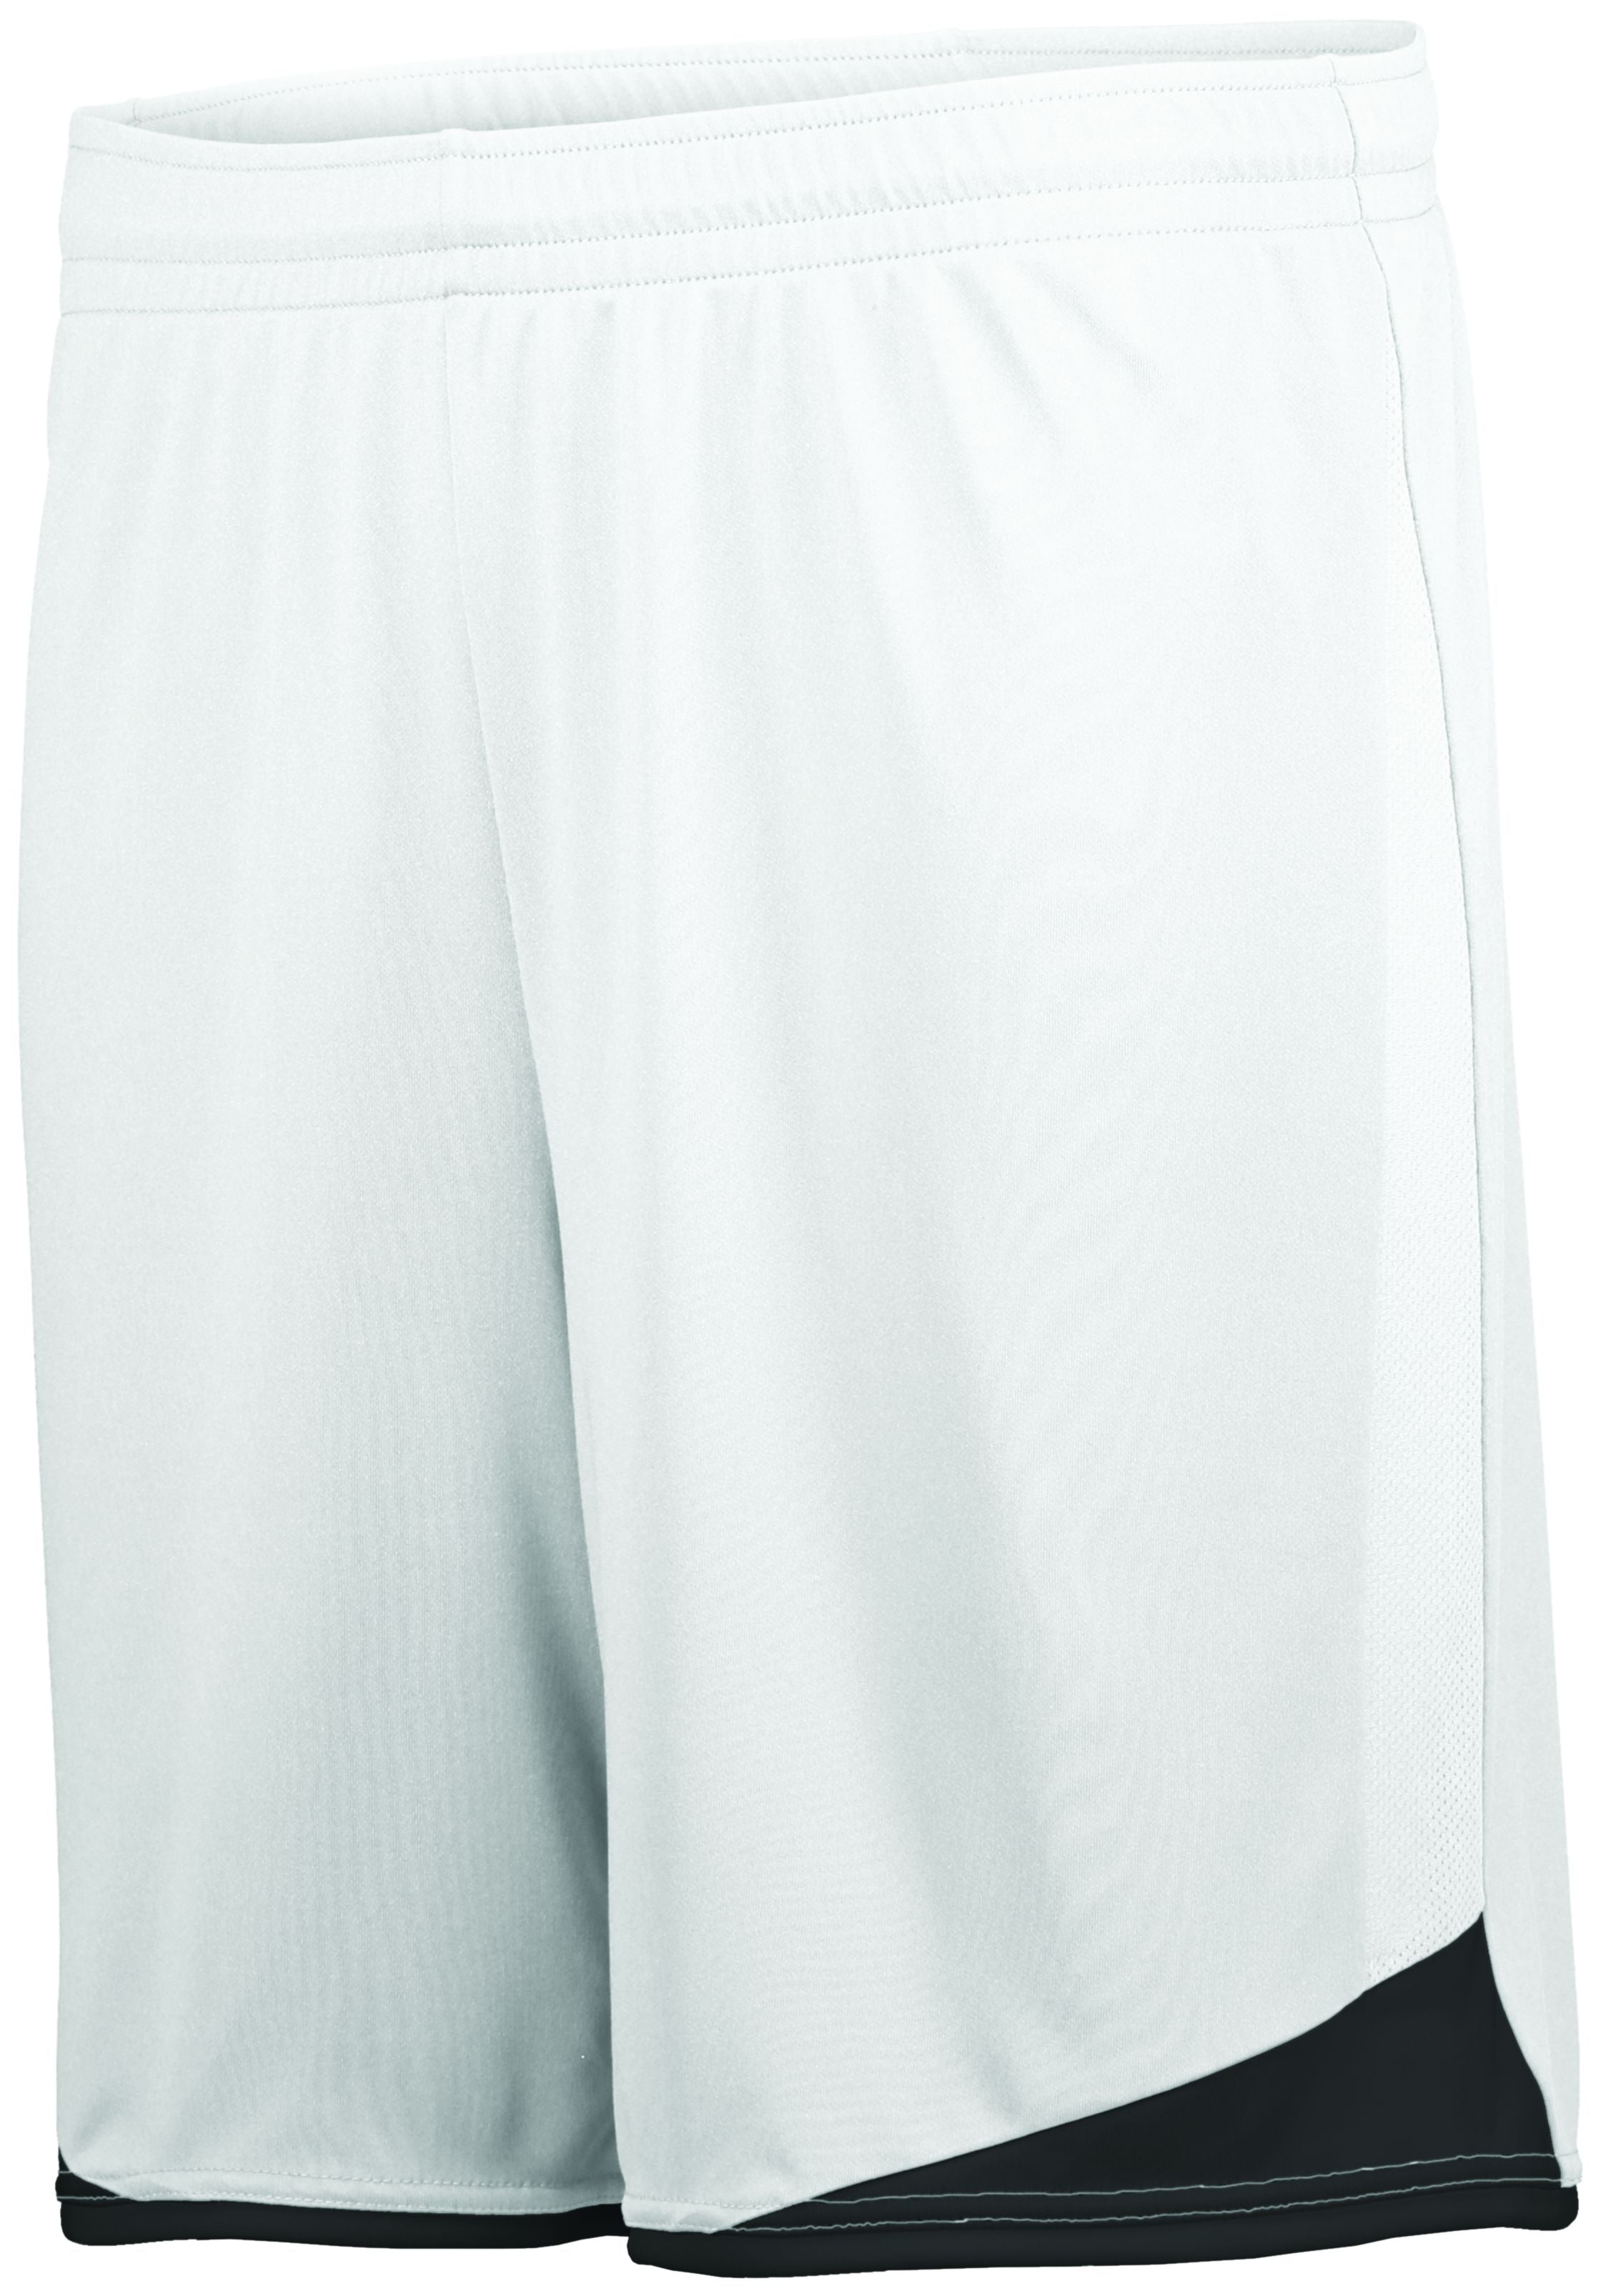 High 5 Youth Stamford Soccer Shorts in White/Black  -Part of the Youth, Youth-Shorts, High5-Products, Soccer, All-Sports-1 product lines at KanaleyCreations.com